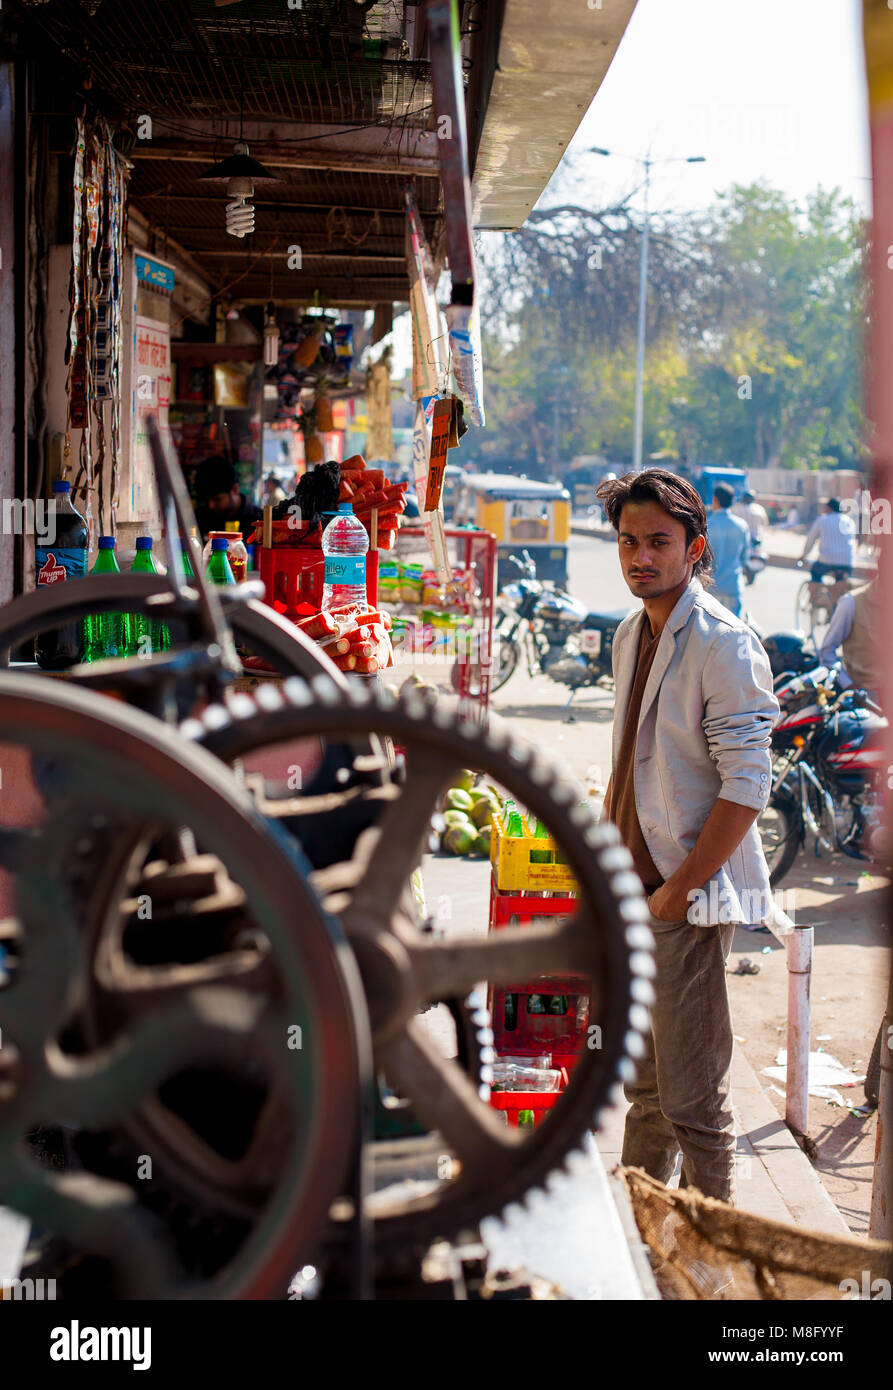 A young Indian man wearing light shirt with hands in his pockets, standing next to a sugarcane machine at his street shop on busy road in Jodhpur Indi Stock Photo